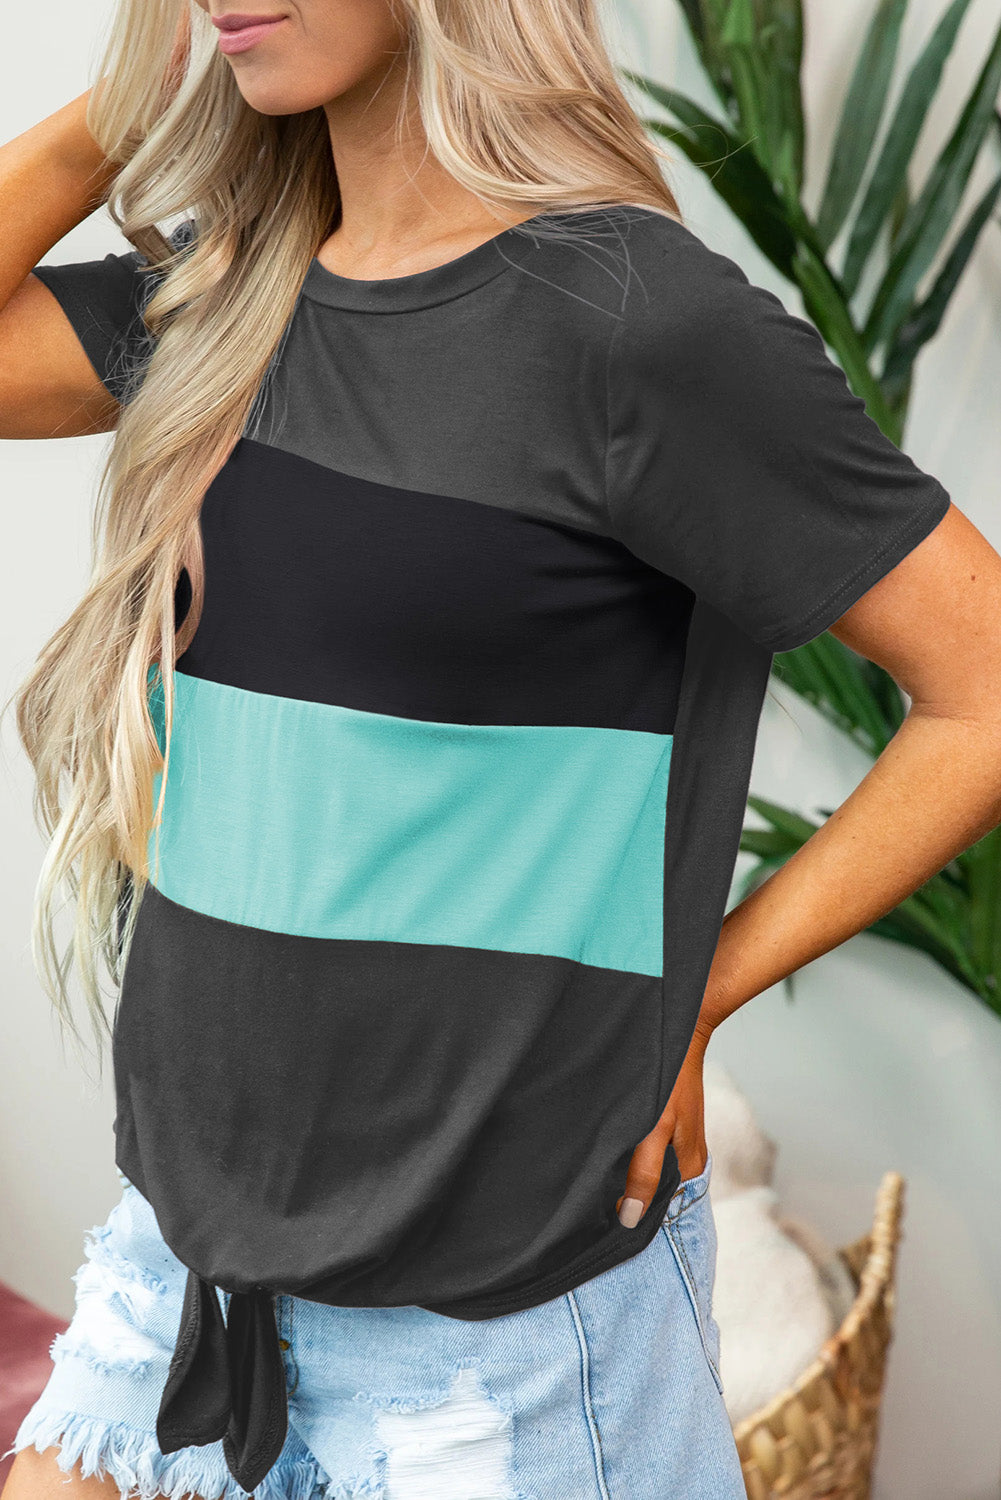 Color Block Panel Knotted T-Shirt